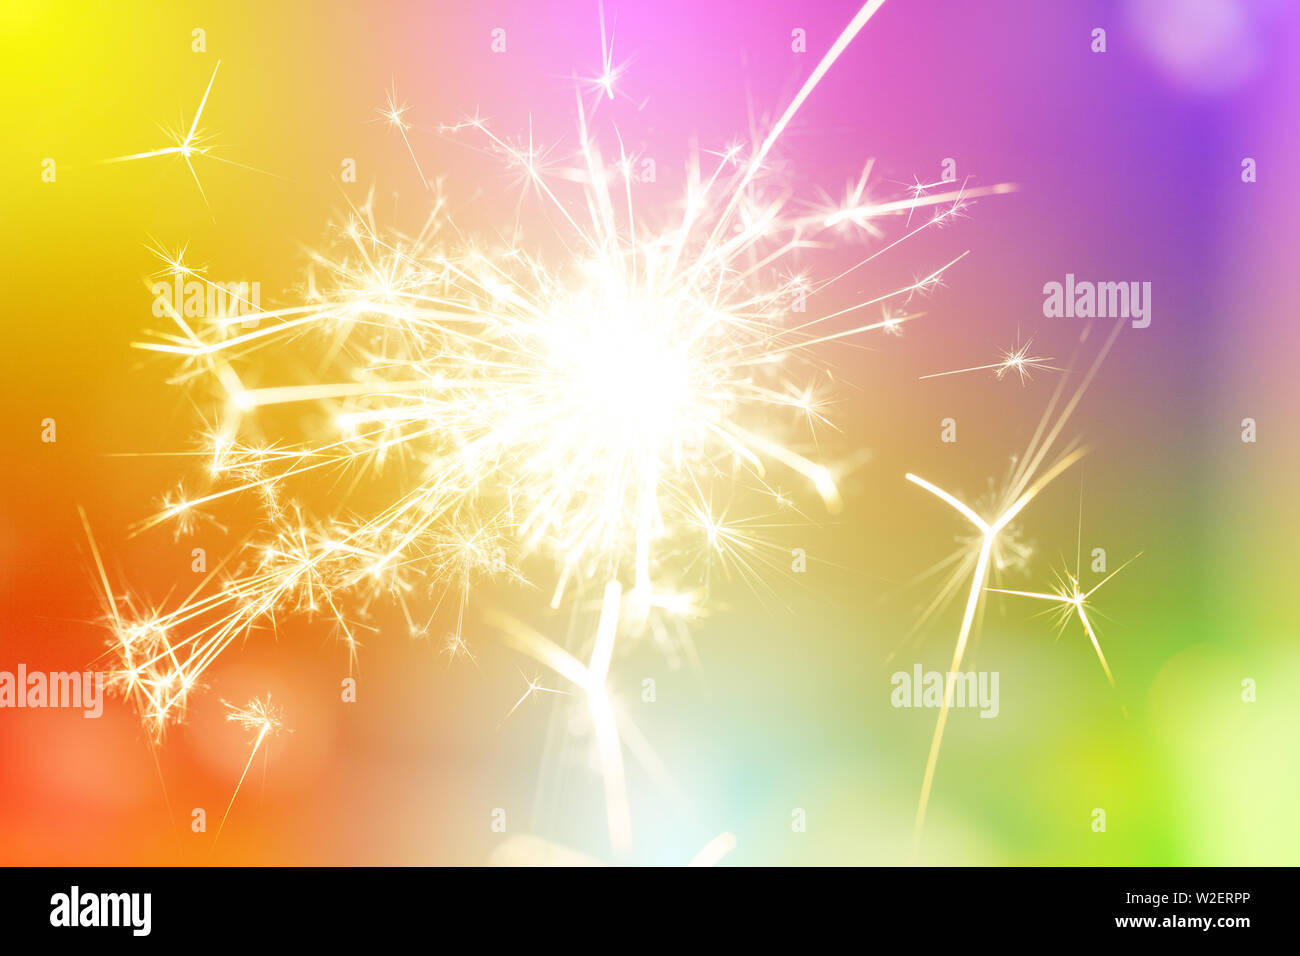 Sparks from hand cold fireworks bright sunspot colorful background Stock Photo